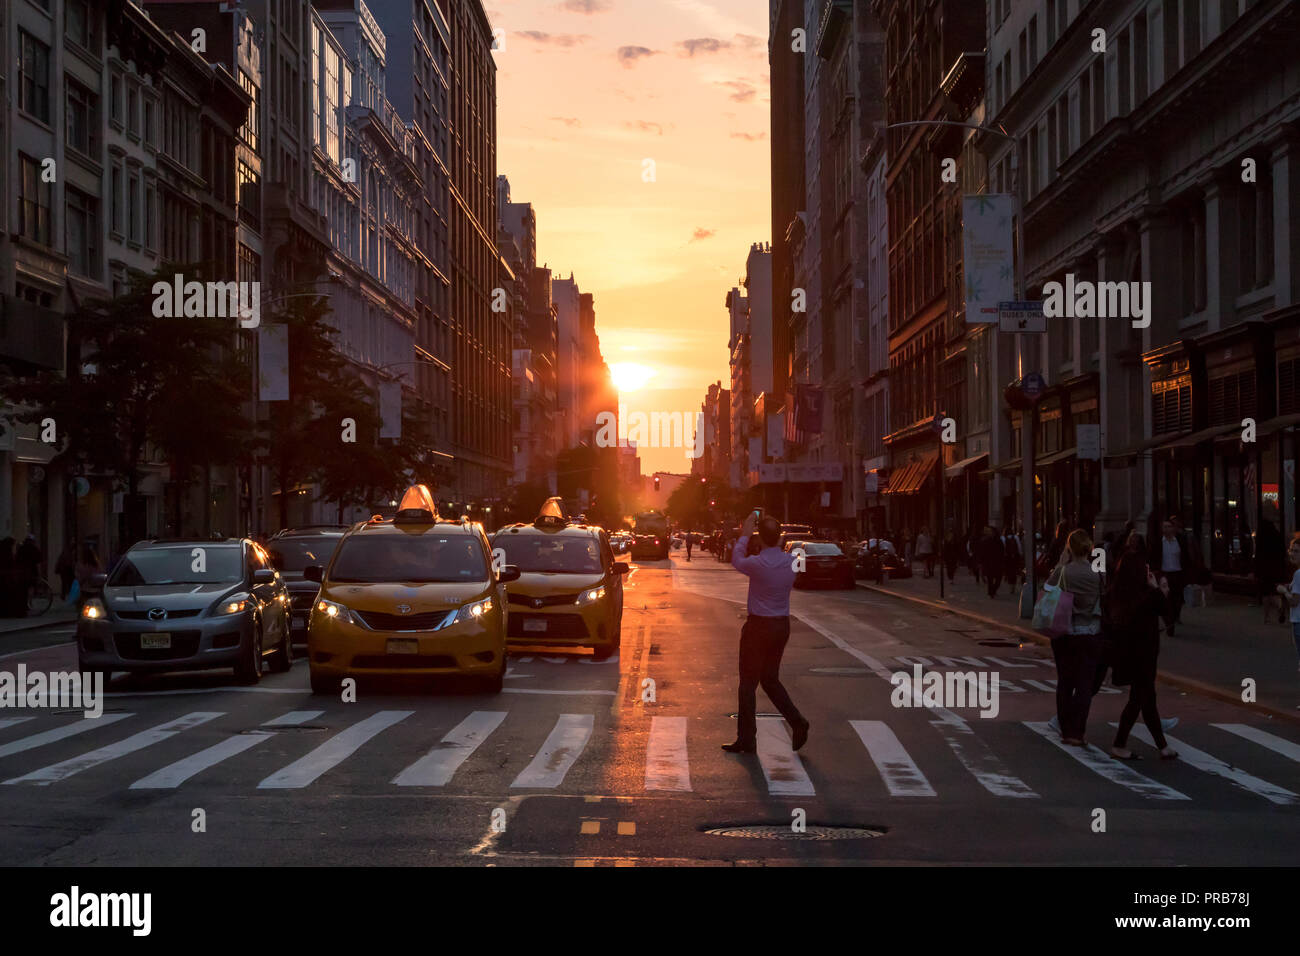 NEW YORK CITY, CIRCA 2018: Man stands in the middle of the intersection on 23rd Street in taking a photo of the evening sunset in Manhattan, New York  Stock Photo